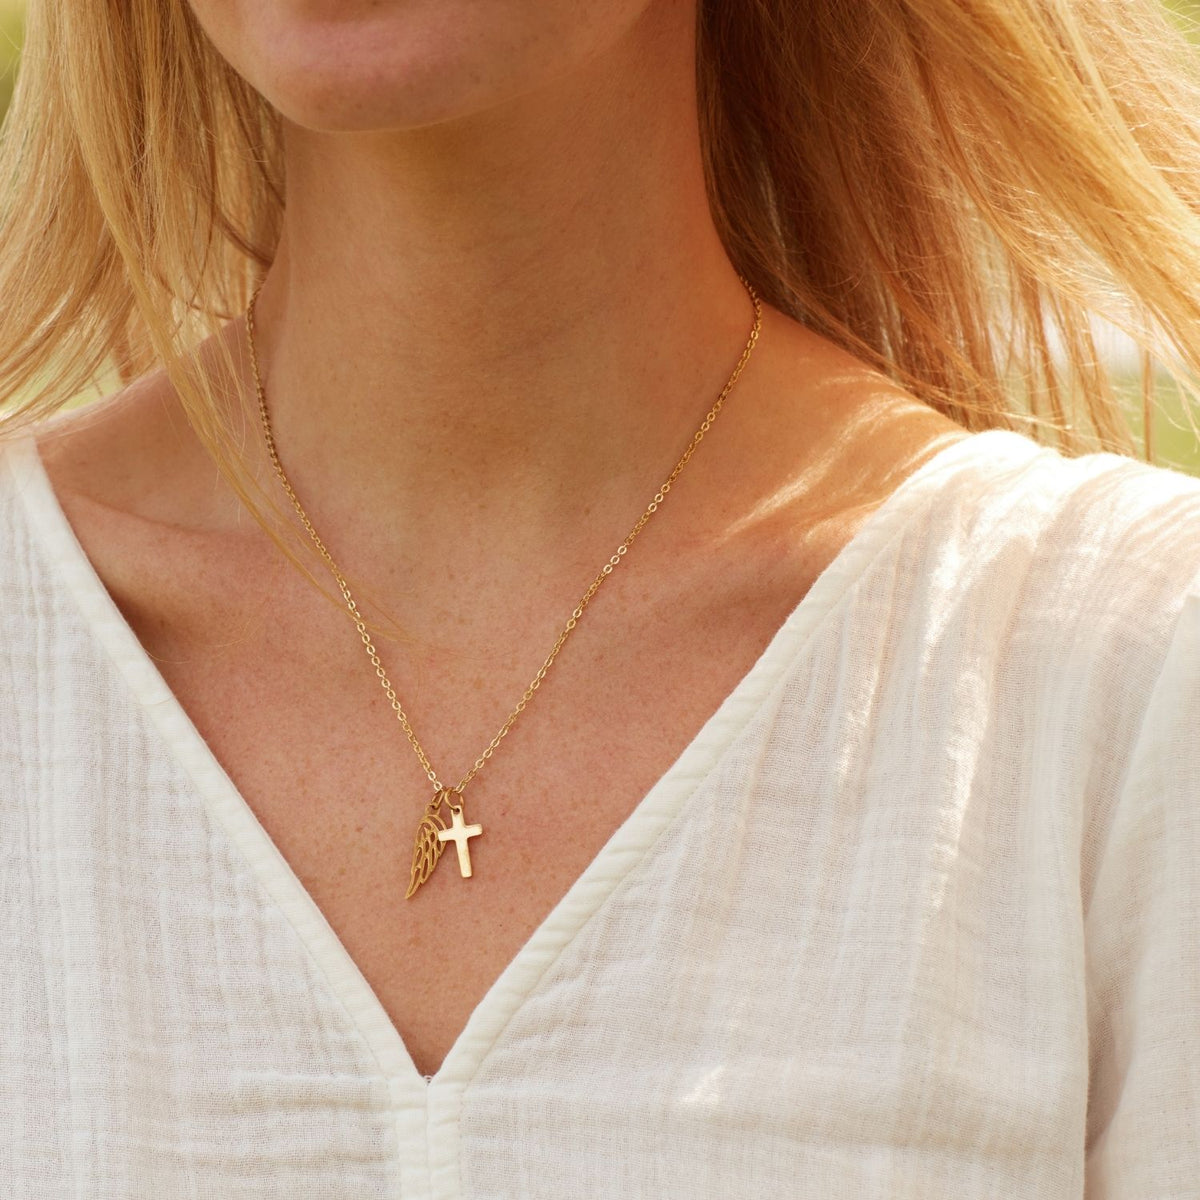 To My Beautiful Daughter | May the Holy Spirit Bless You | Cross Necklace